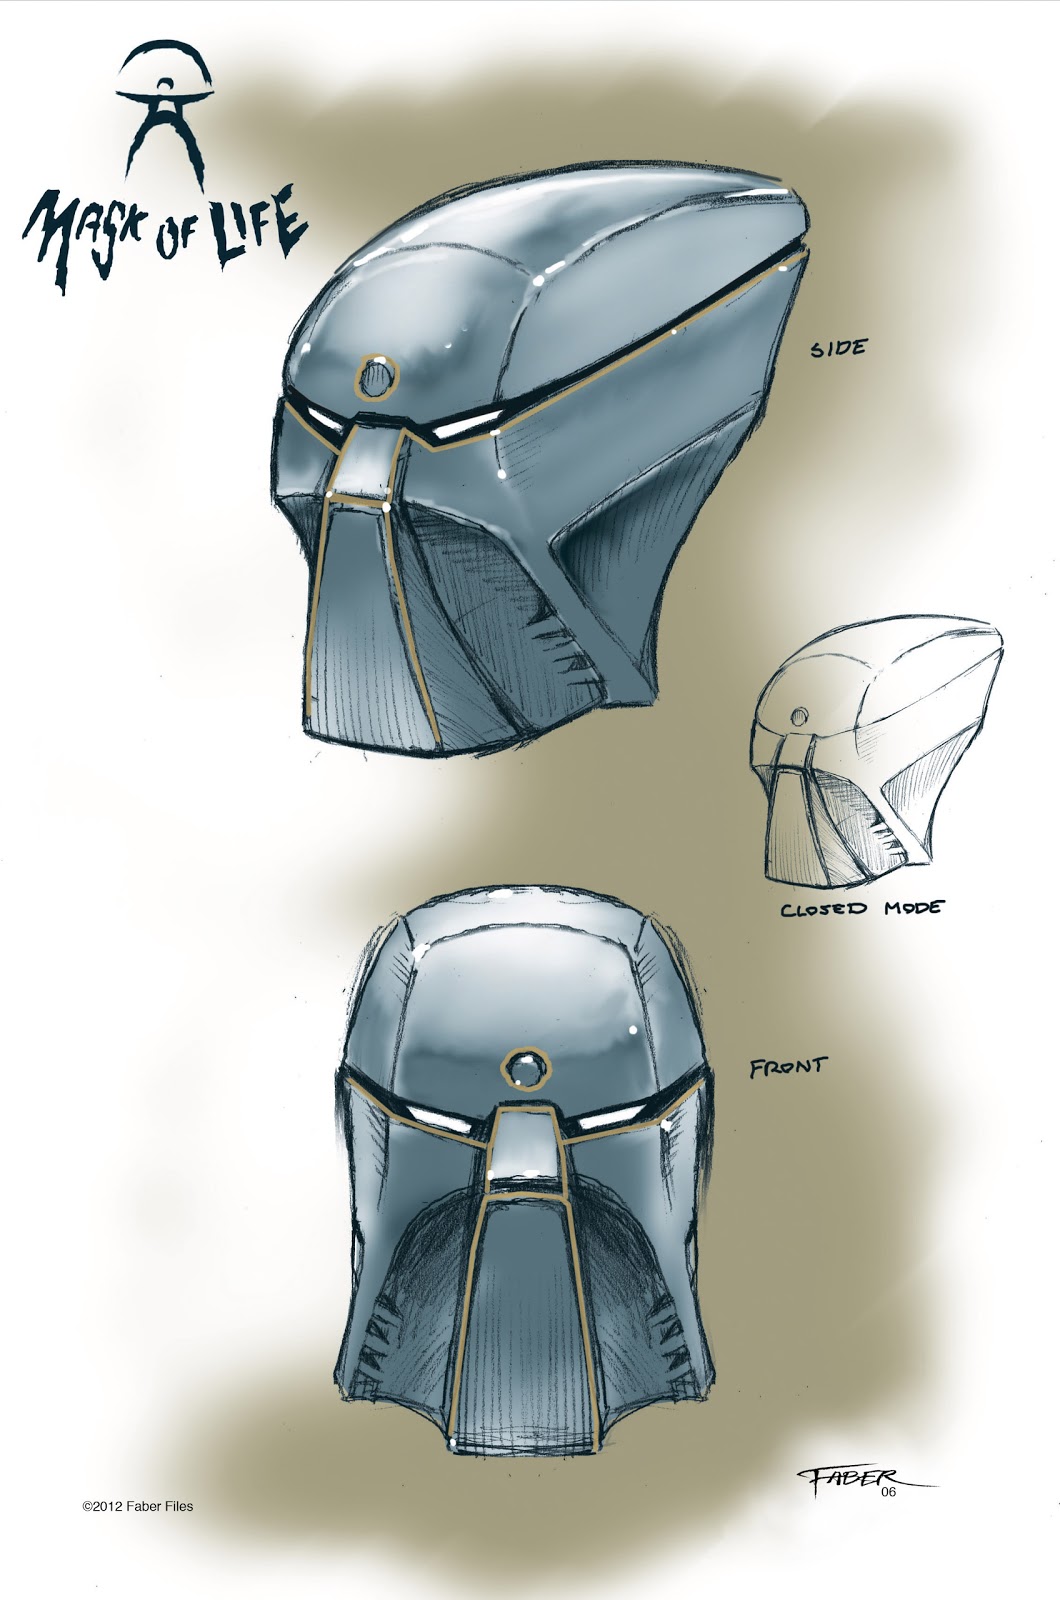 Bionicle Concept Arts - Página 2 Christian+Faber+Files_MOL+early+design